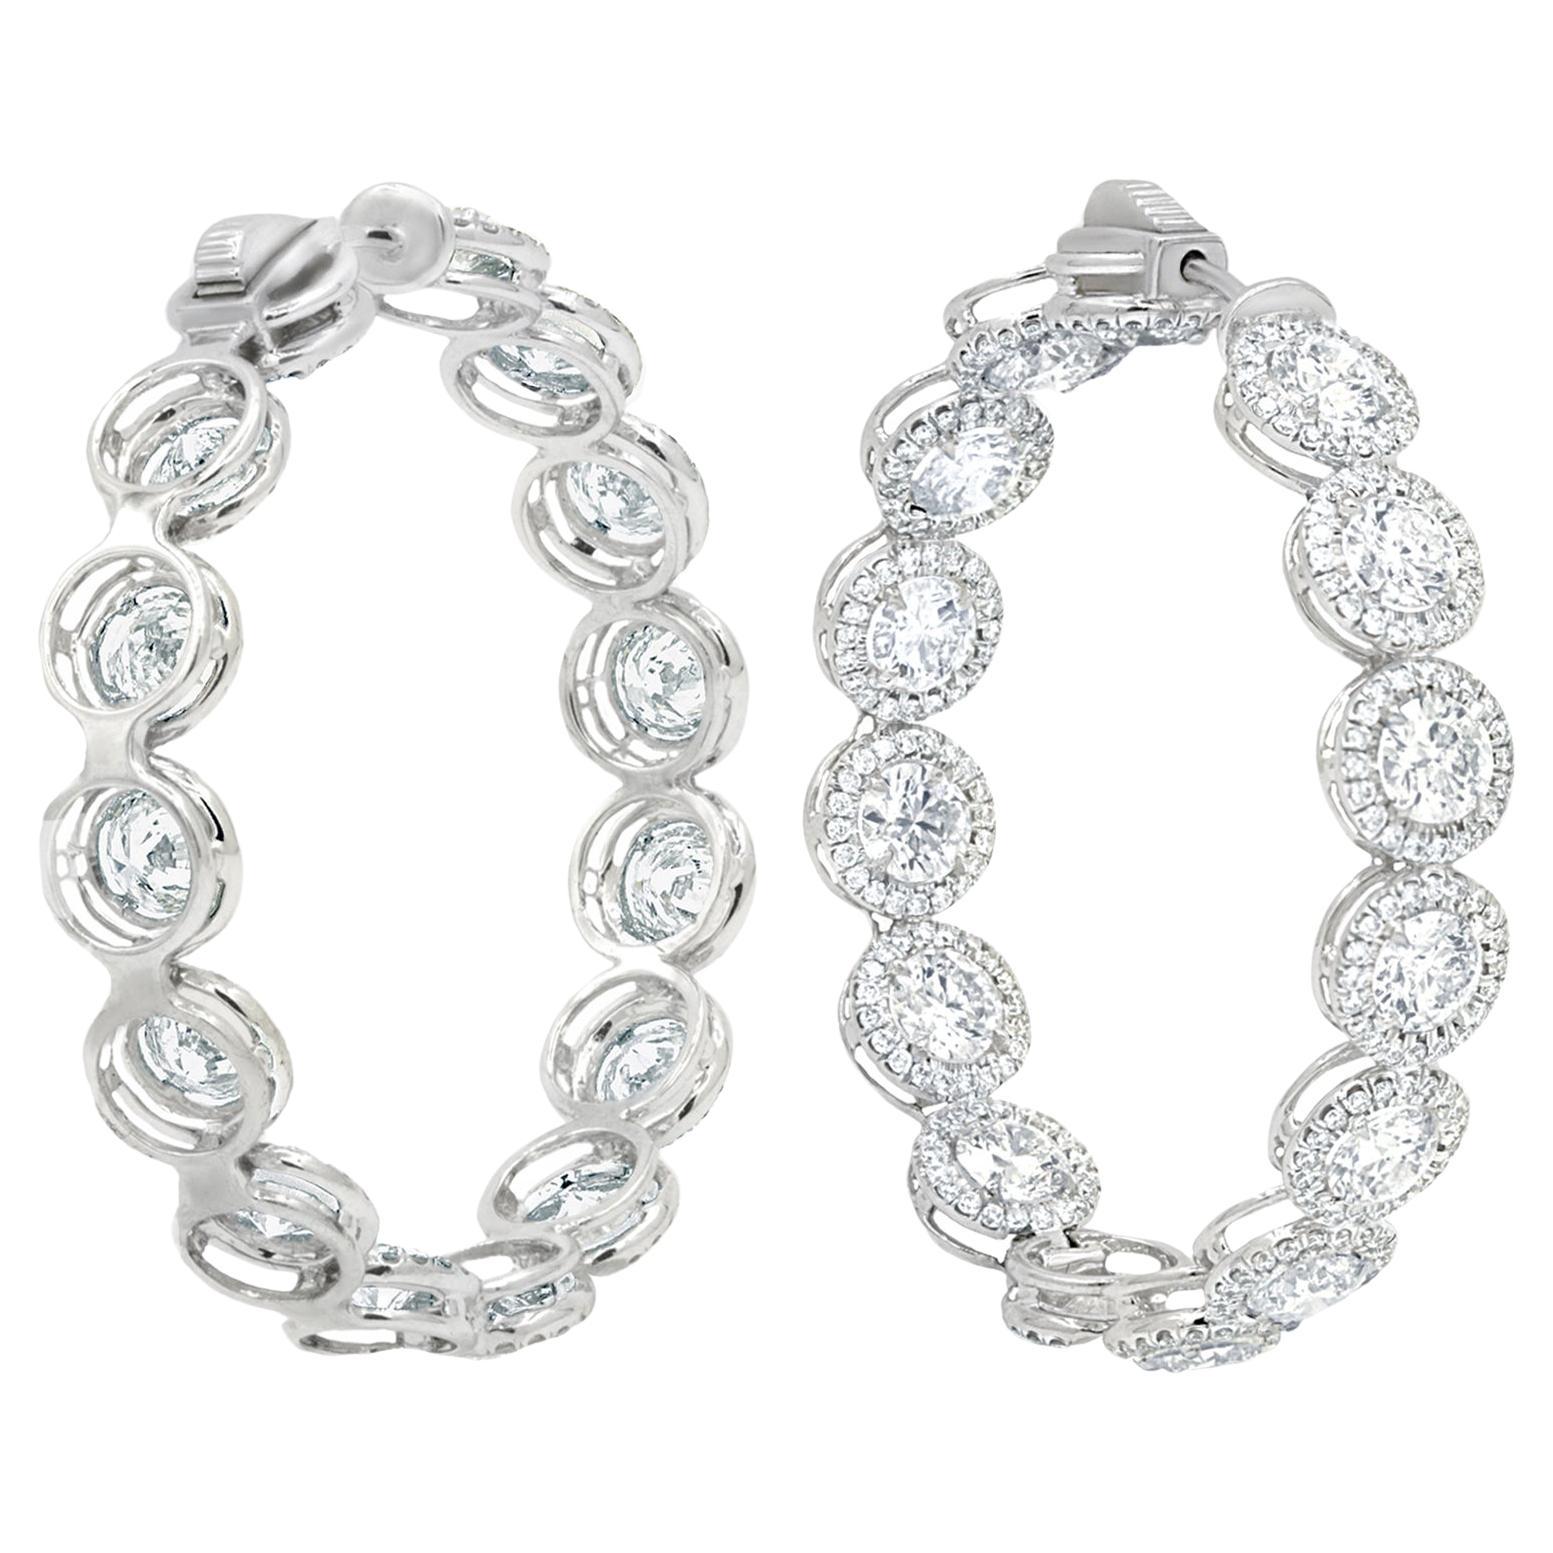 Diana M. 18 kt white gold inside-out hoop earrings with a halo design For Sale